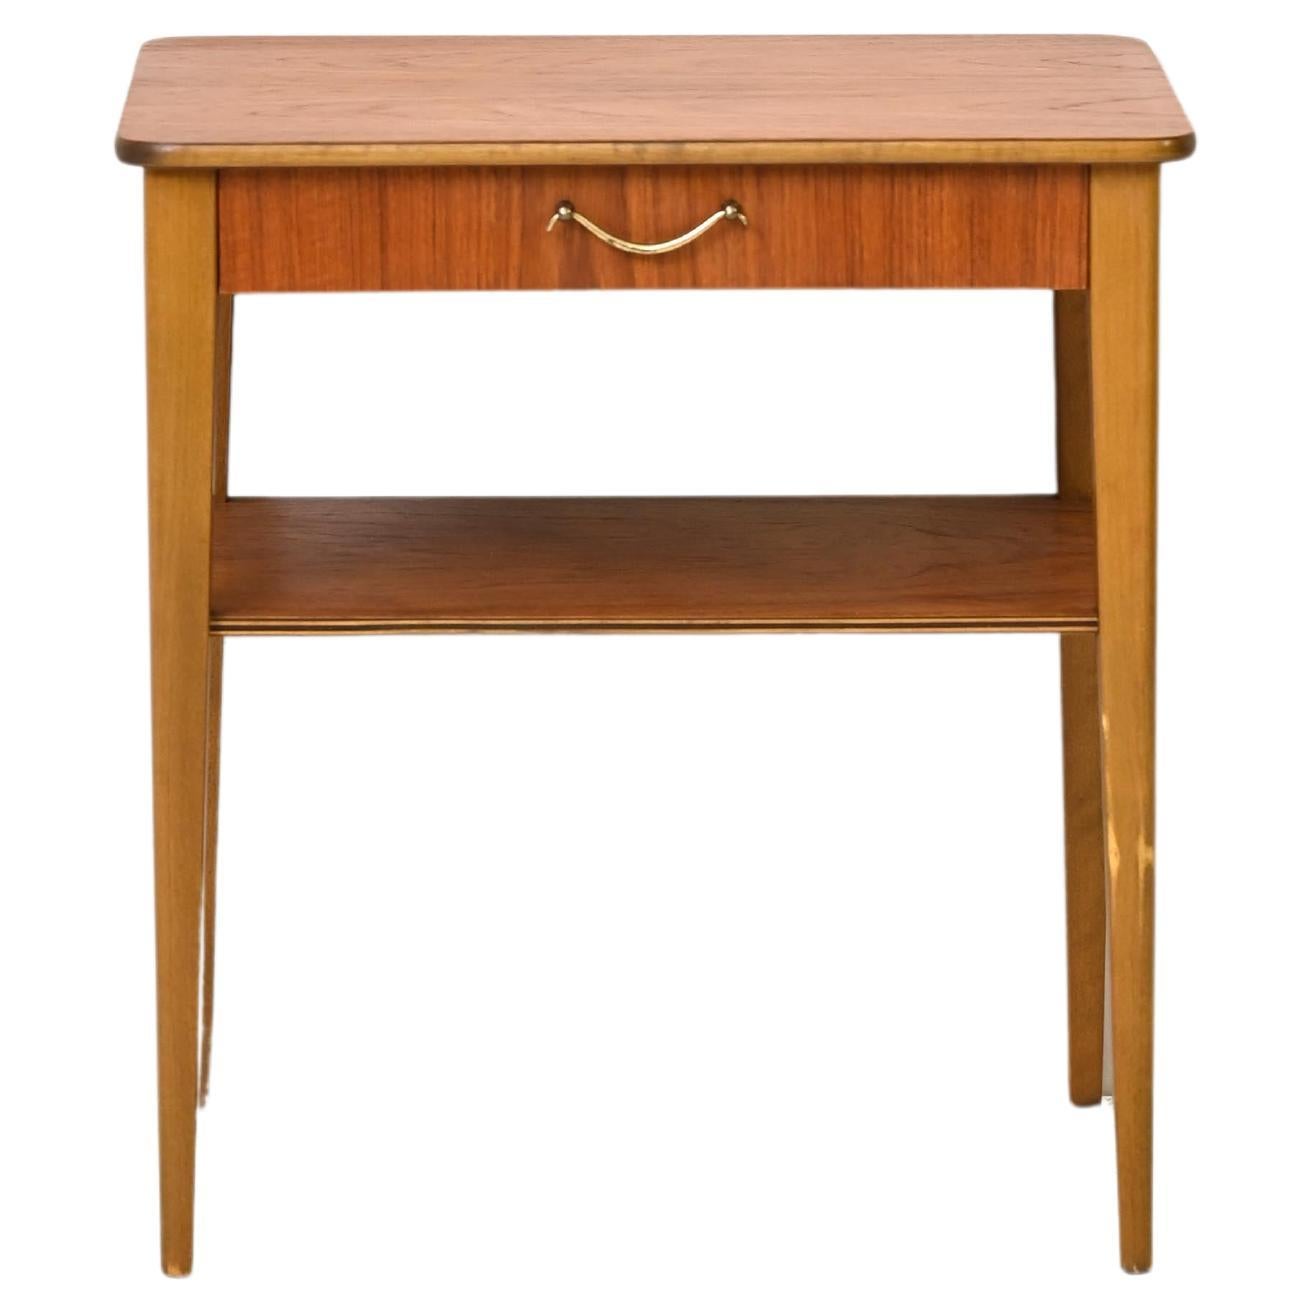 Teak and Birch Bedside Table